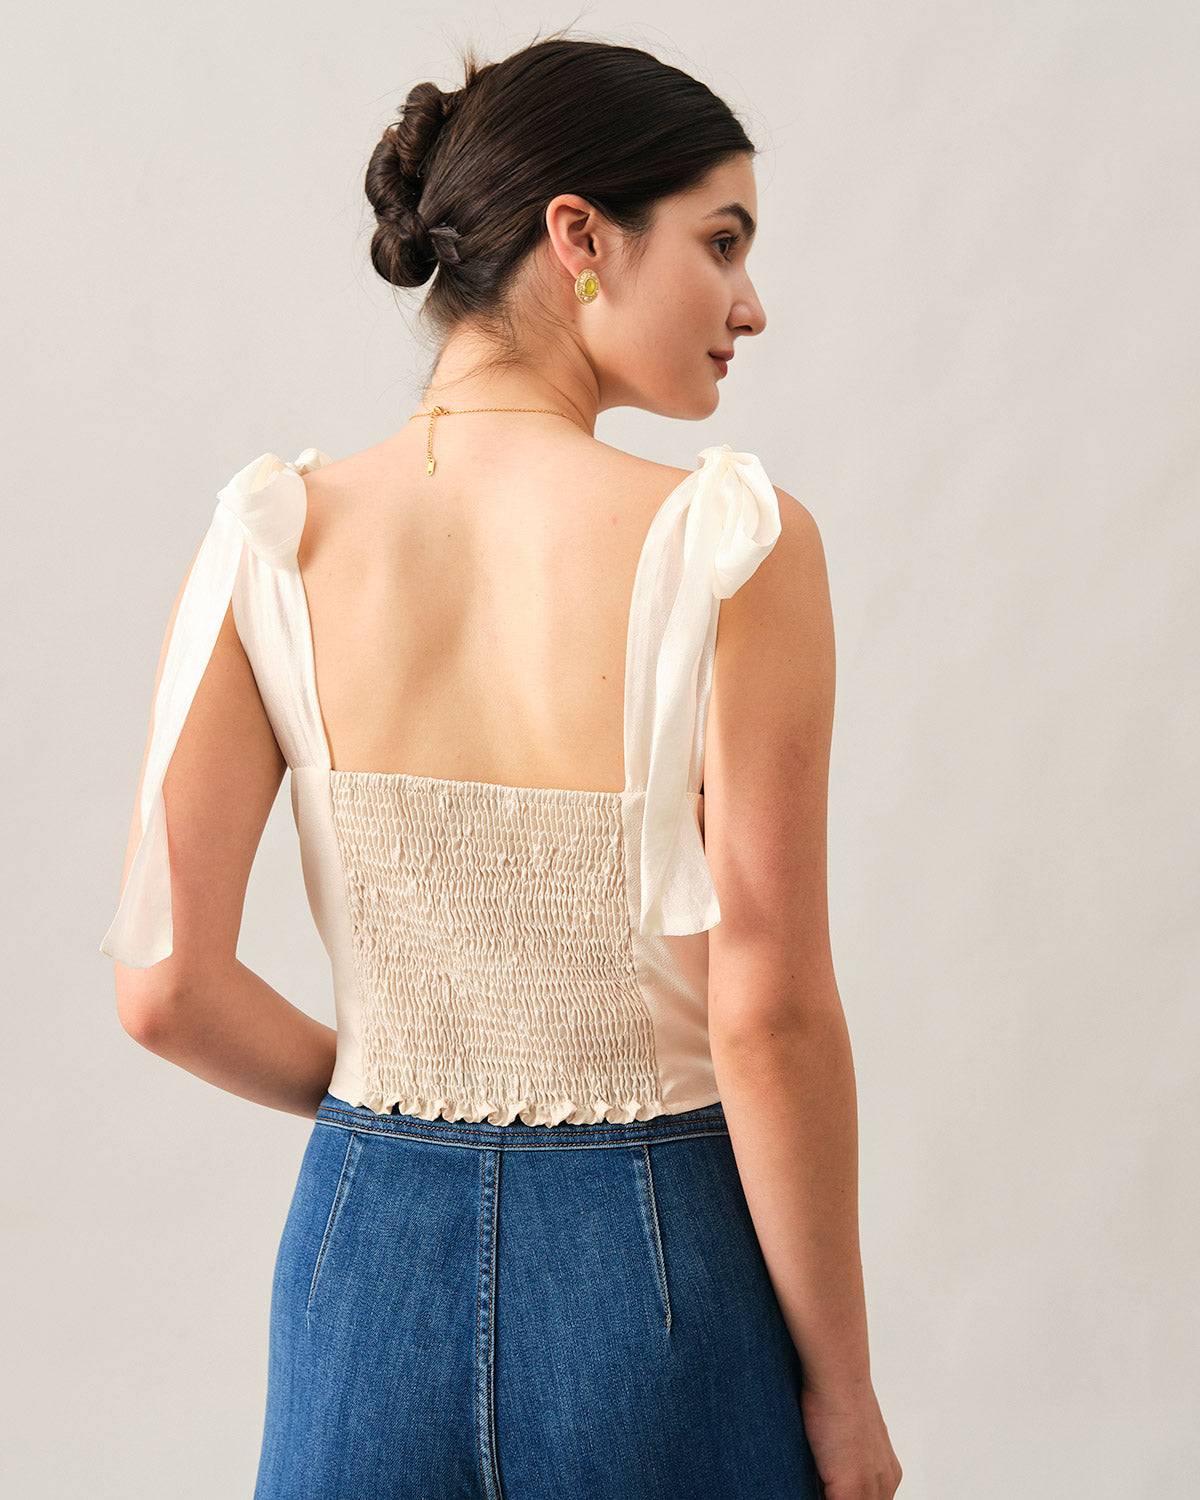 Buy Another Sunday Embroidered Cami Top With Tie Strap In from